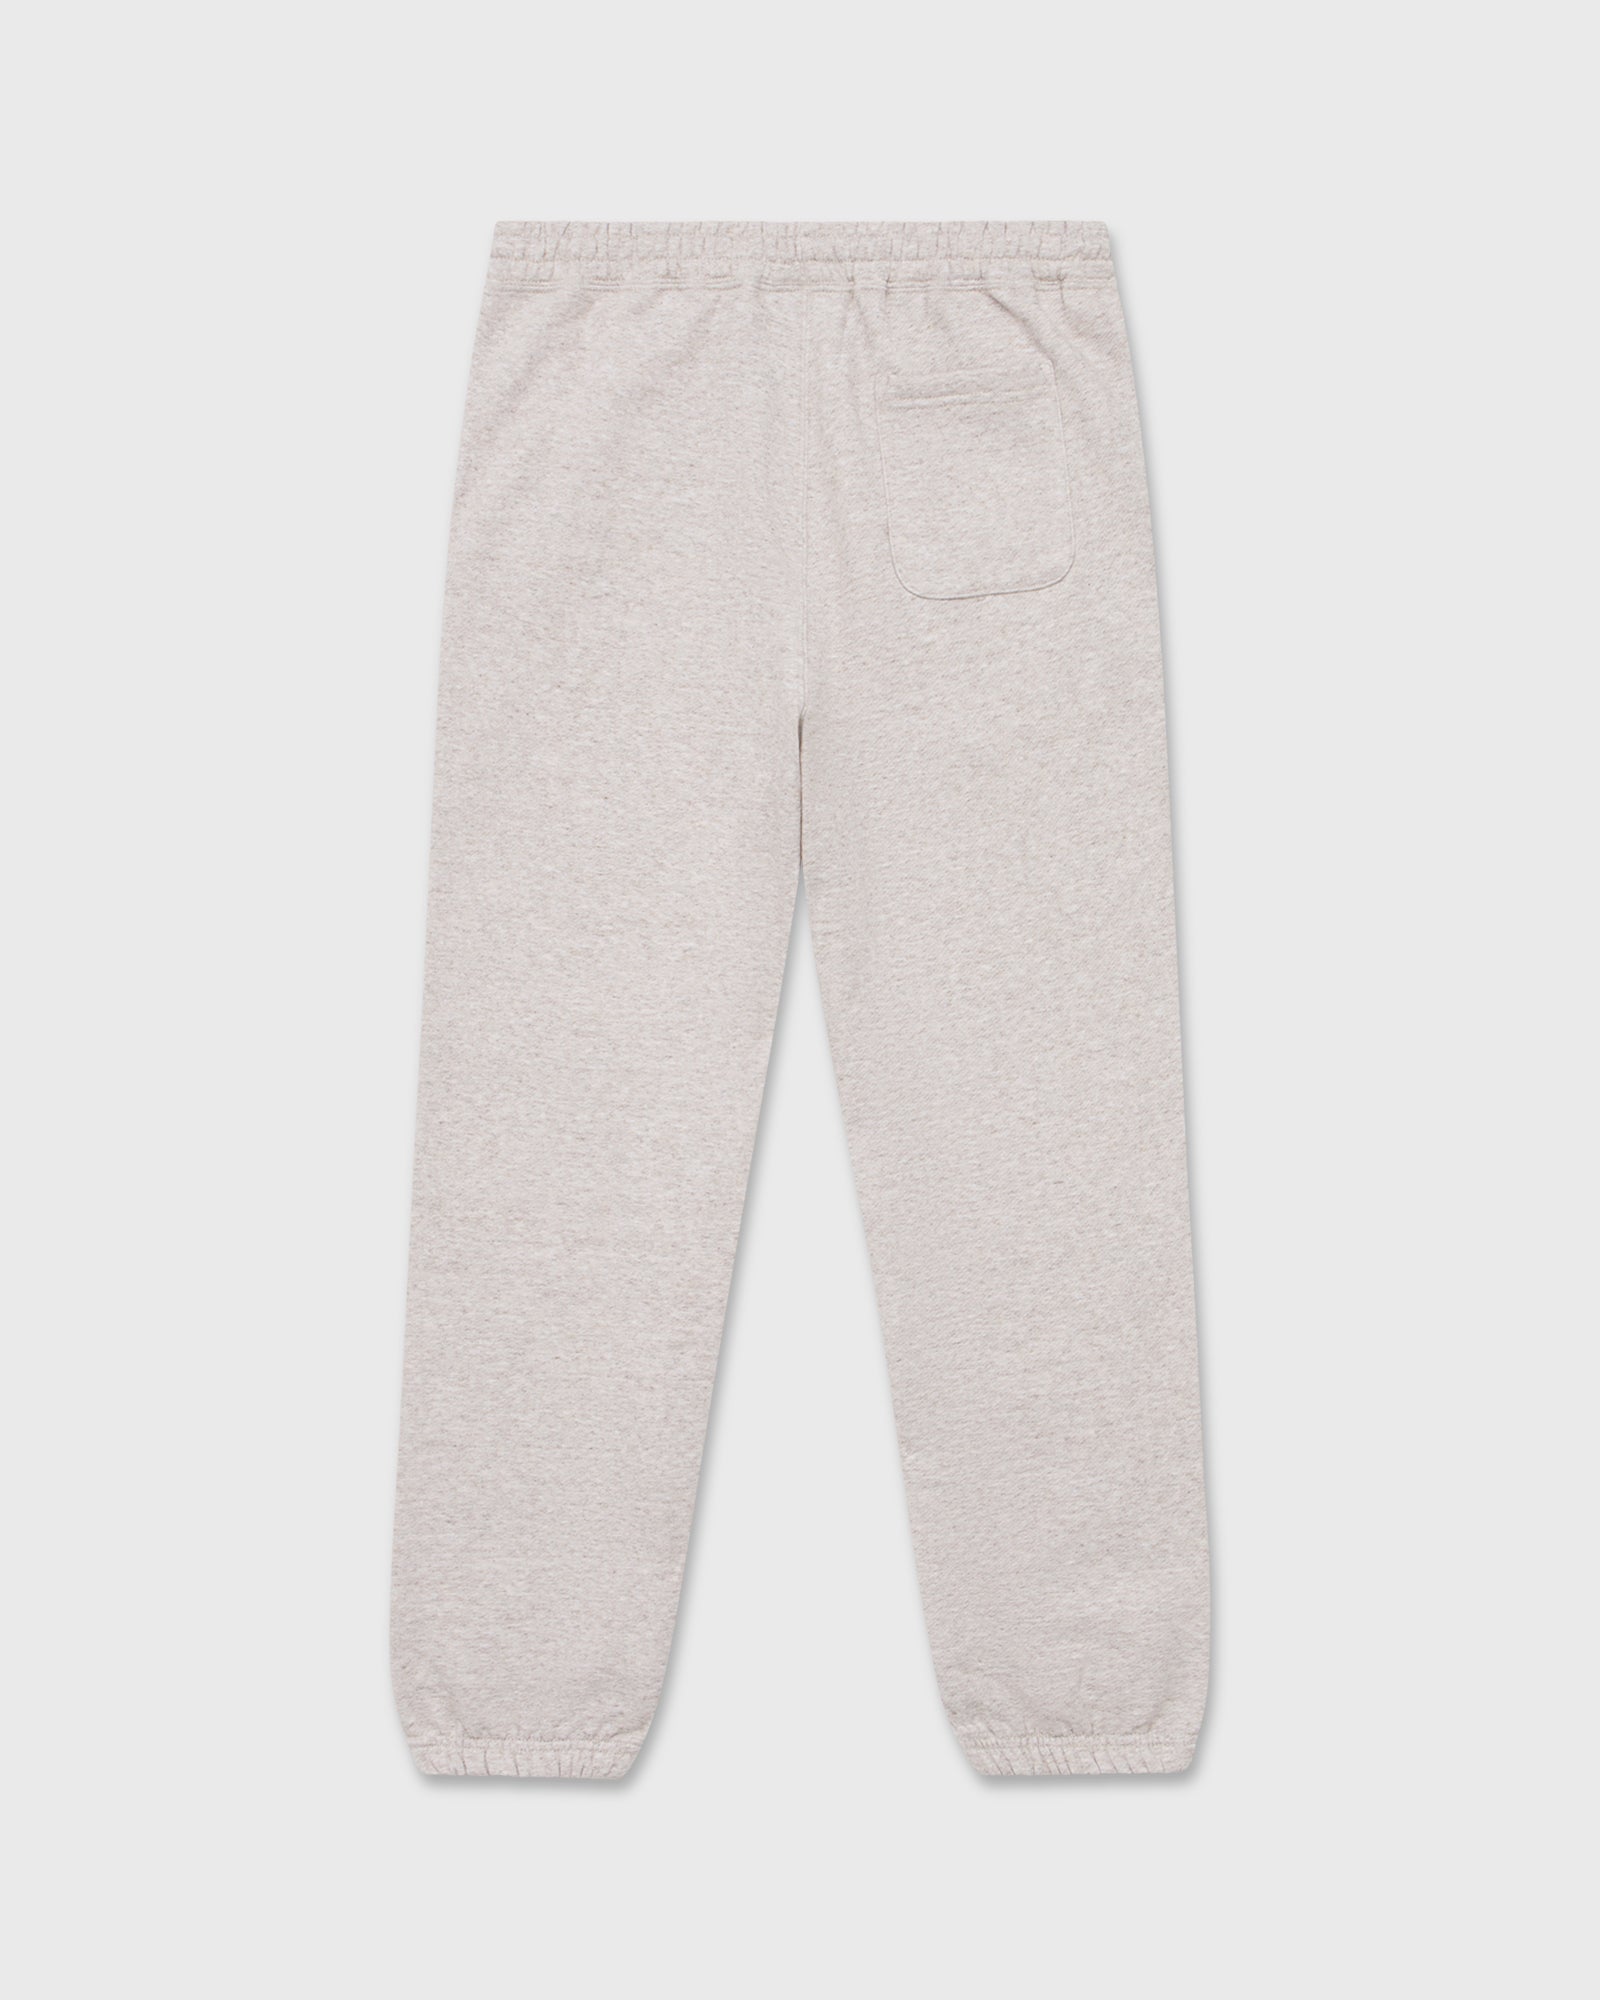 Speckle Fleece Relaxed Fit Sweatpant - Oatmeal IMAGE #3